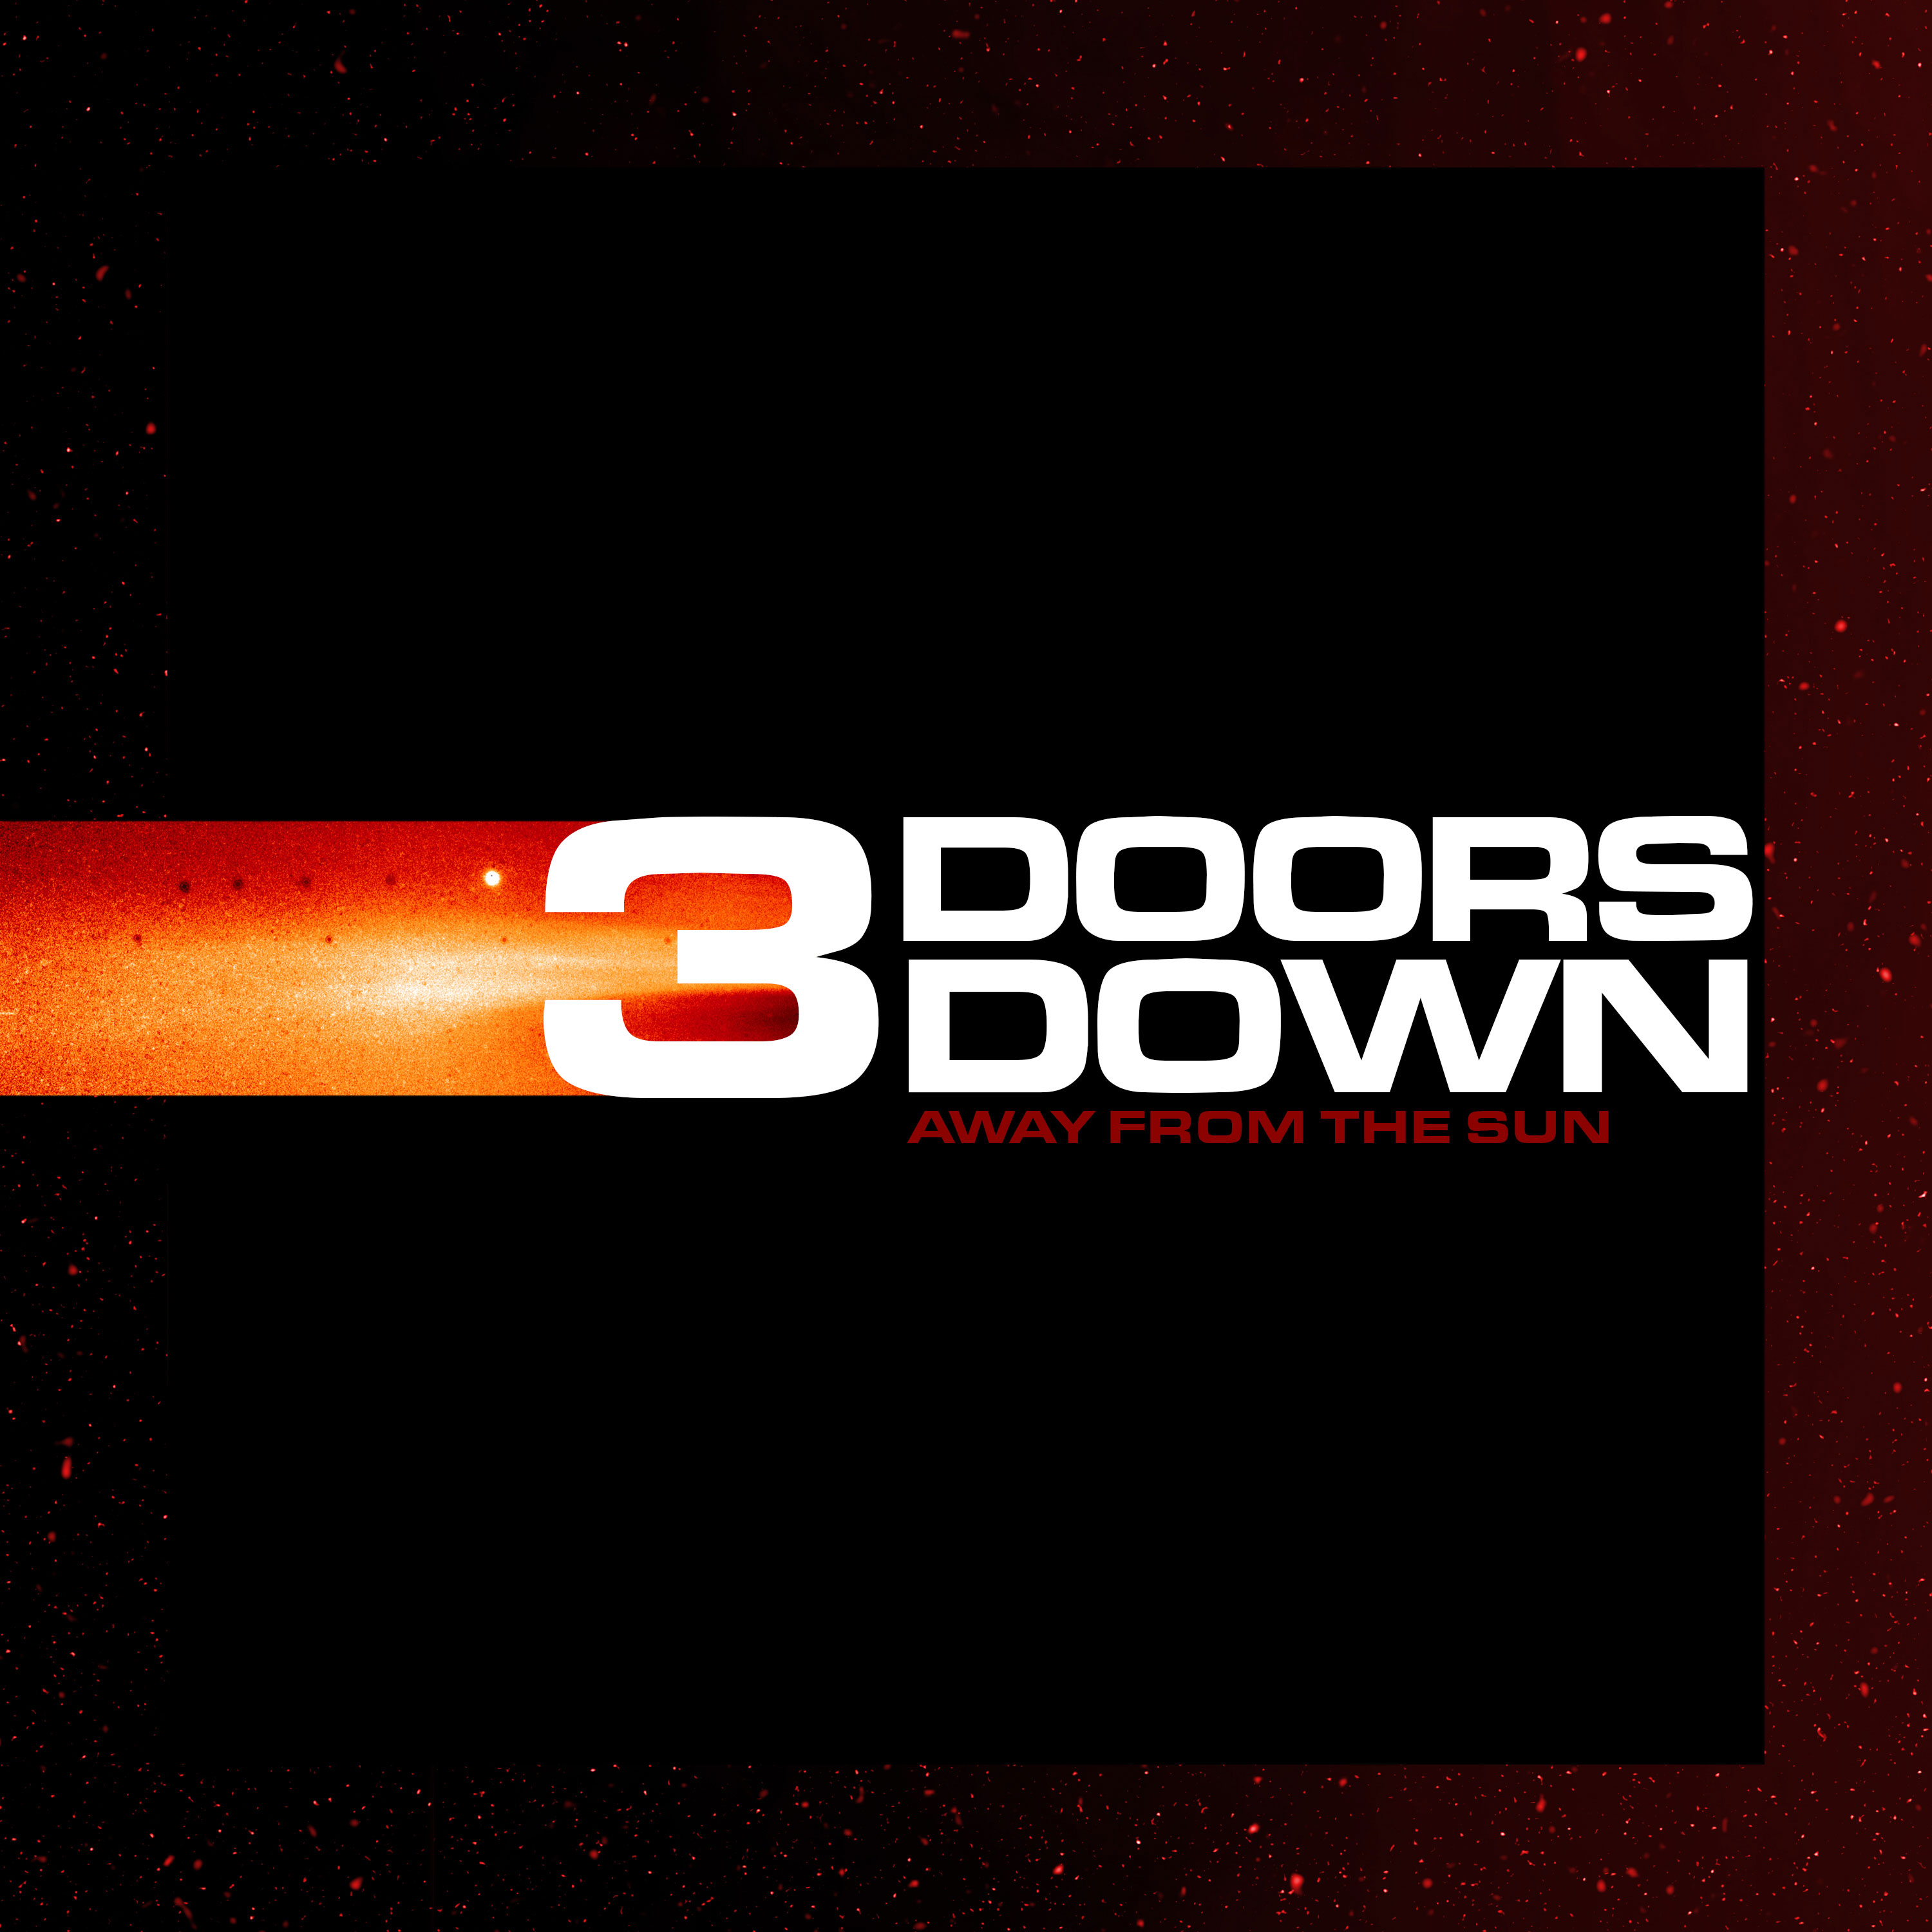 3 Doors Down Celebrates 20th Anniversary Of Away From The Sun With.